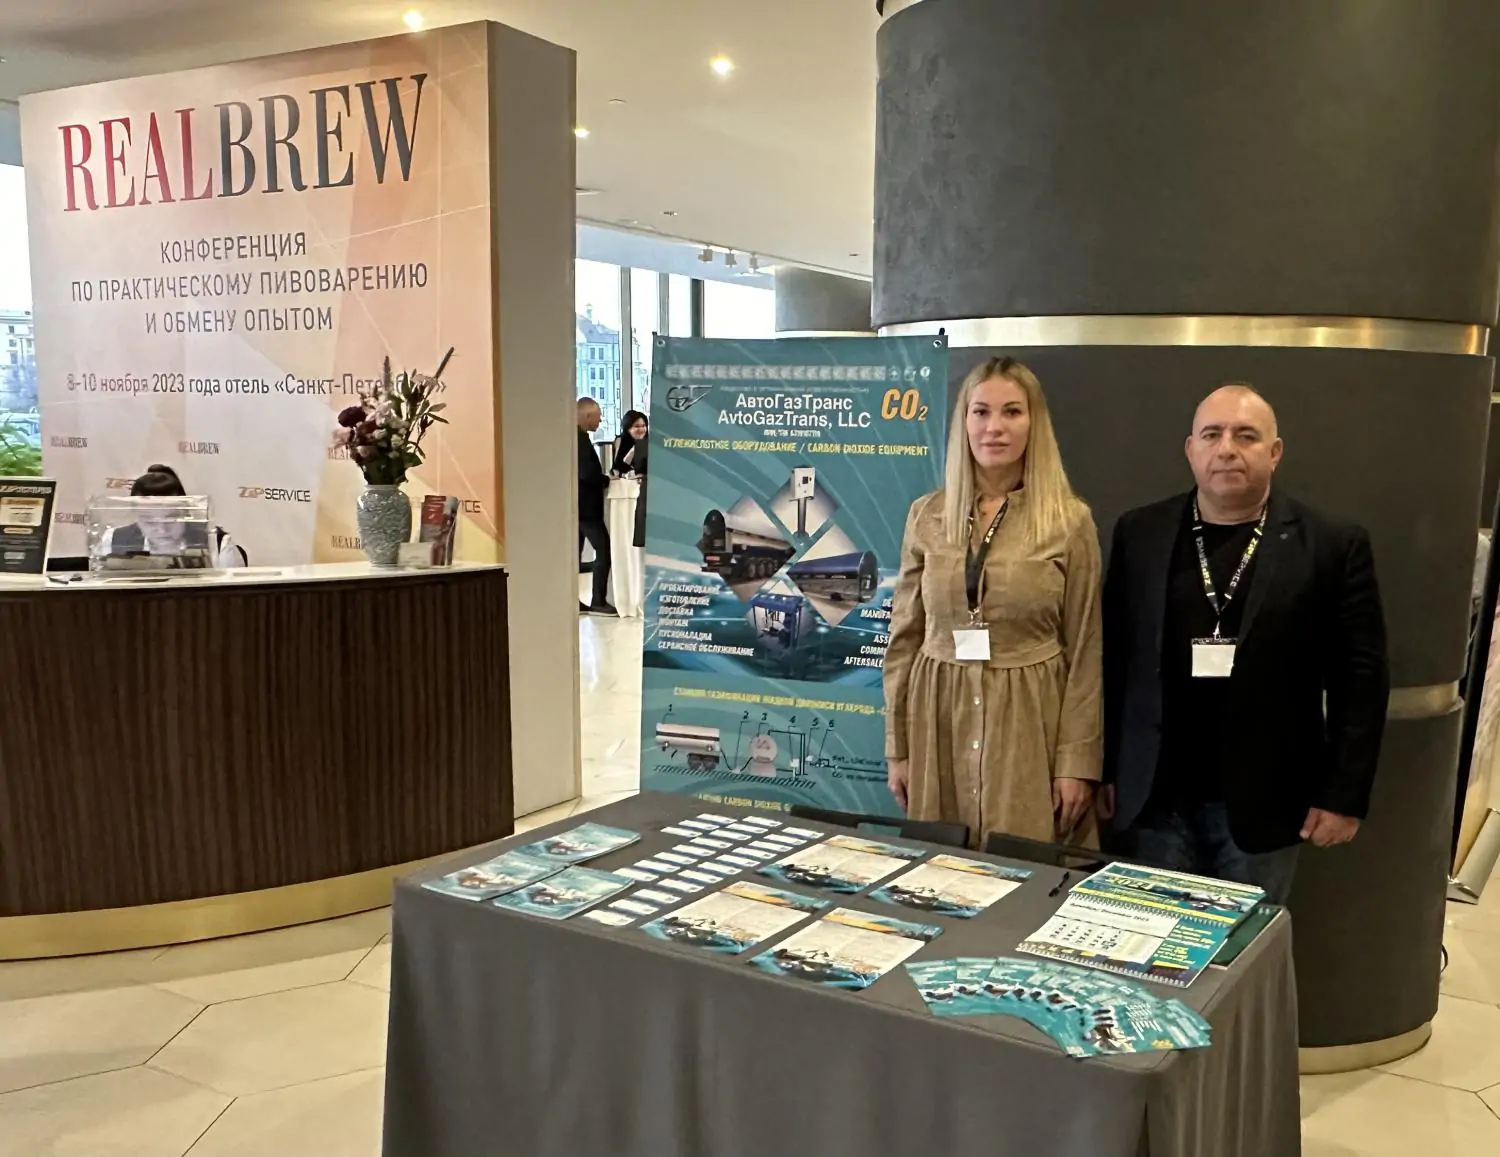 AvtoGazTrans LLC at the conference on practical brewing and exchange of experience “RealBrew 2023” in St. Petersburg